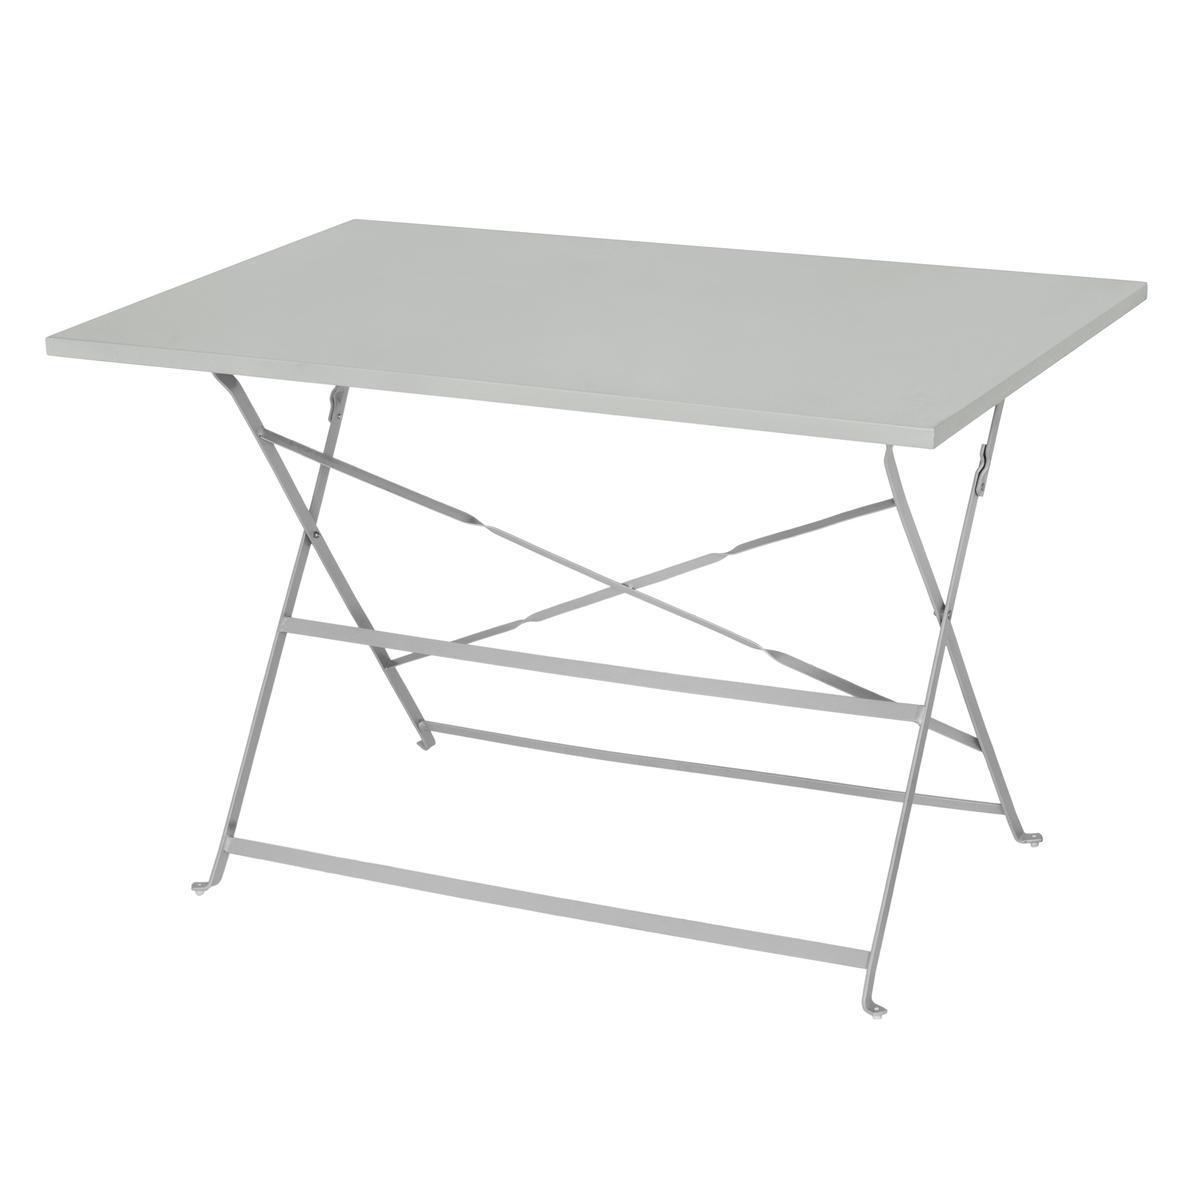 TABLE DIANA RECT 4P GRIS